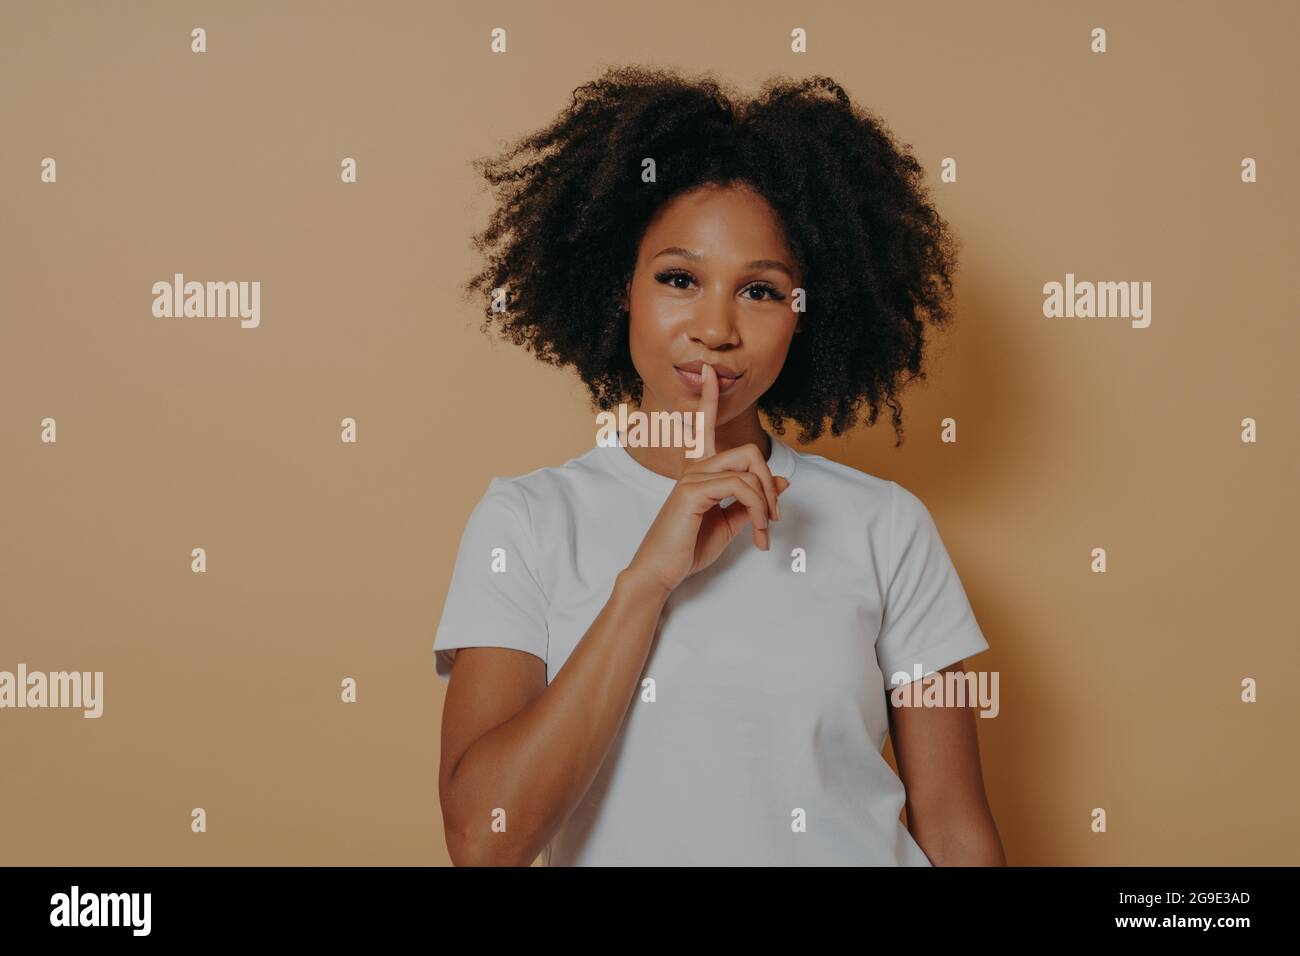 Close-up portrait of afro american young wavy-haired woman in white t-shirt showing shh sign Stock Photo